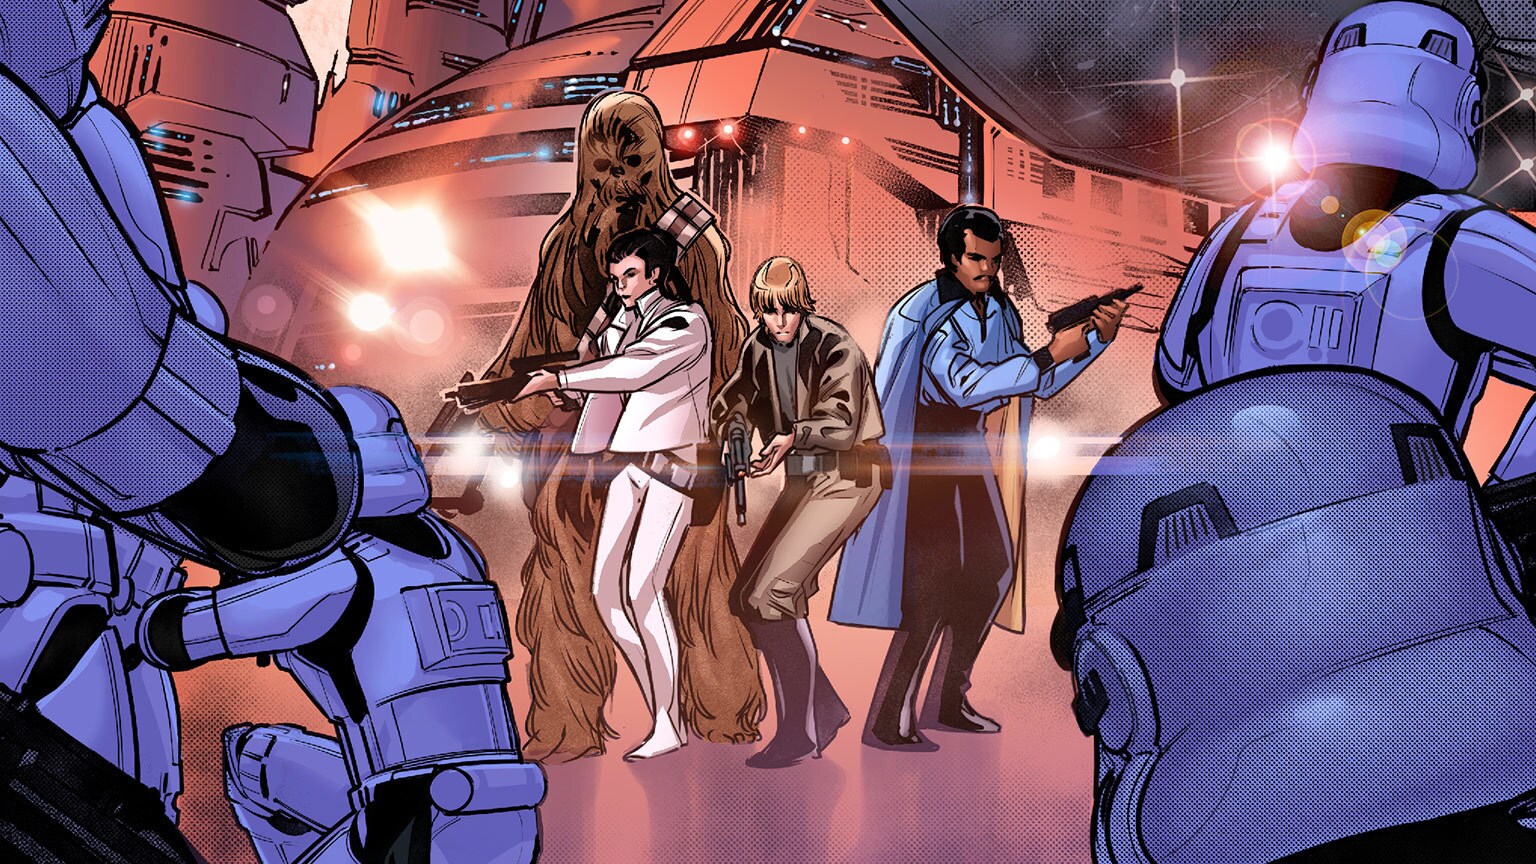 Luke, Leia, and Lando Return to Cloud City in Star Wars #3 - Exclusive